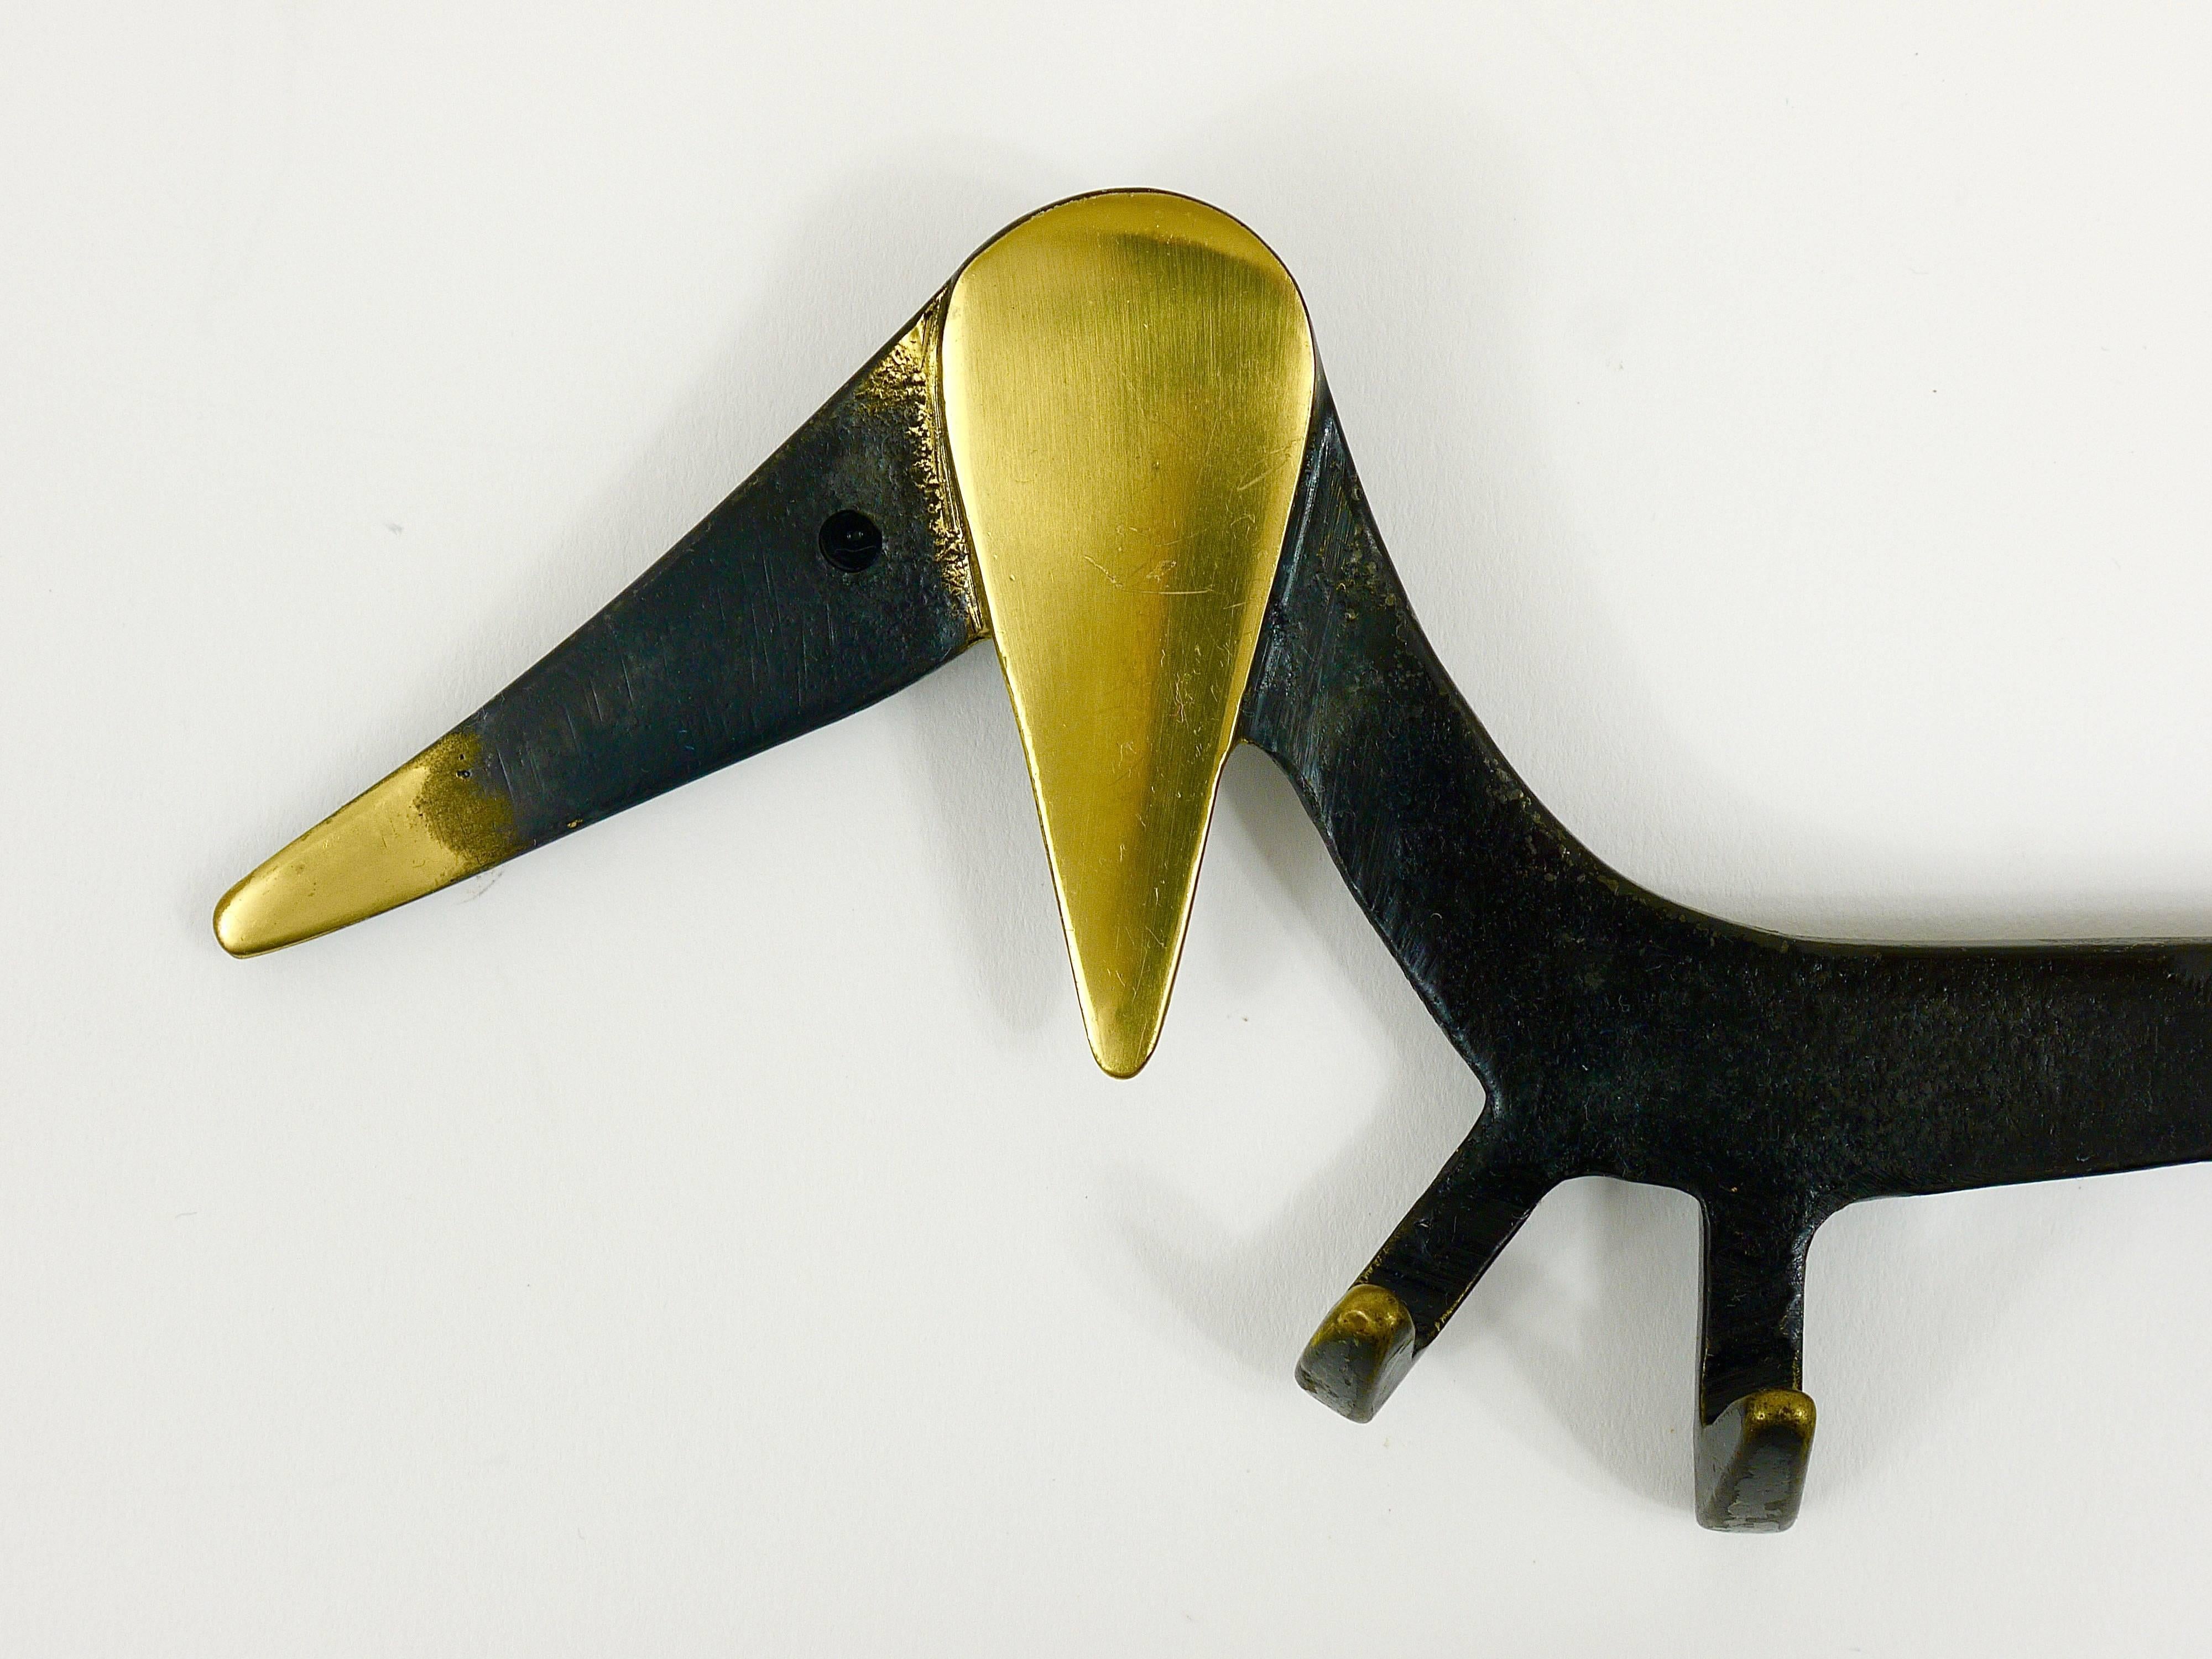 A charming and rare key holder, displaying a Wiener dog, sausage dog. A humorous design by Walter Bosse, executed by Baller, Austria in the 1950s. Made of brass, in excellent condition.